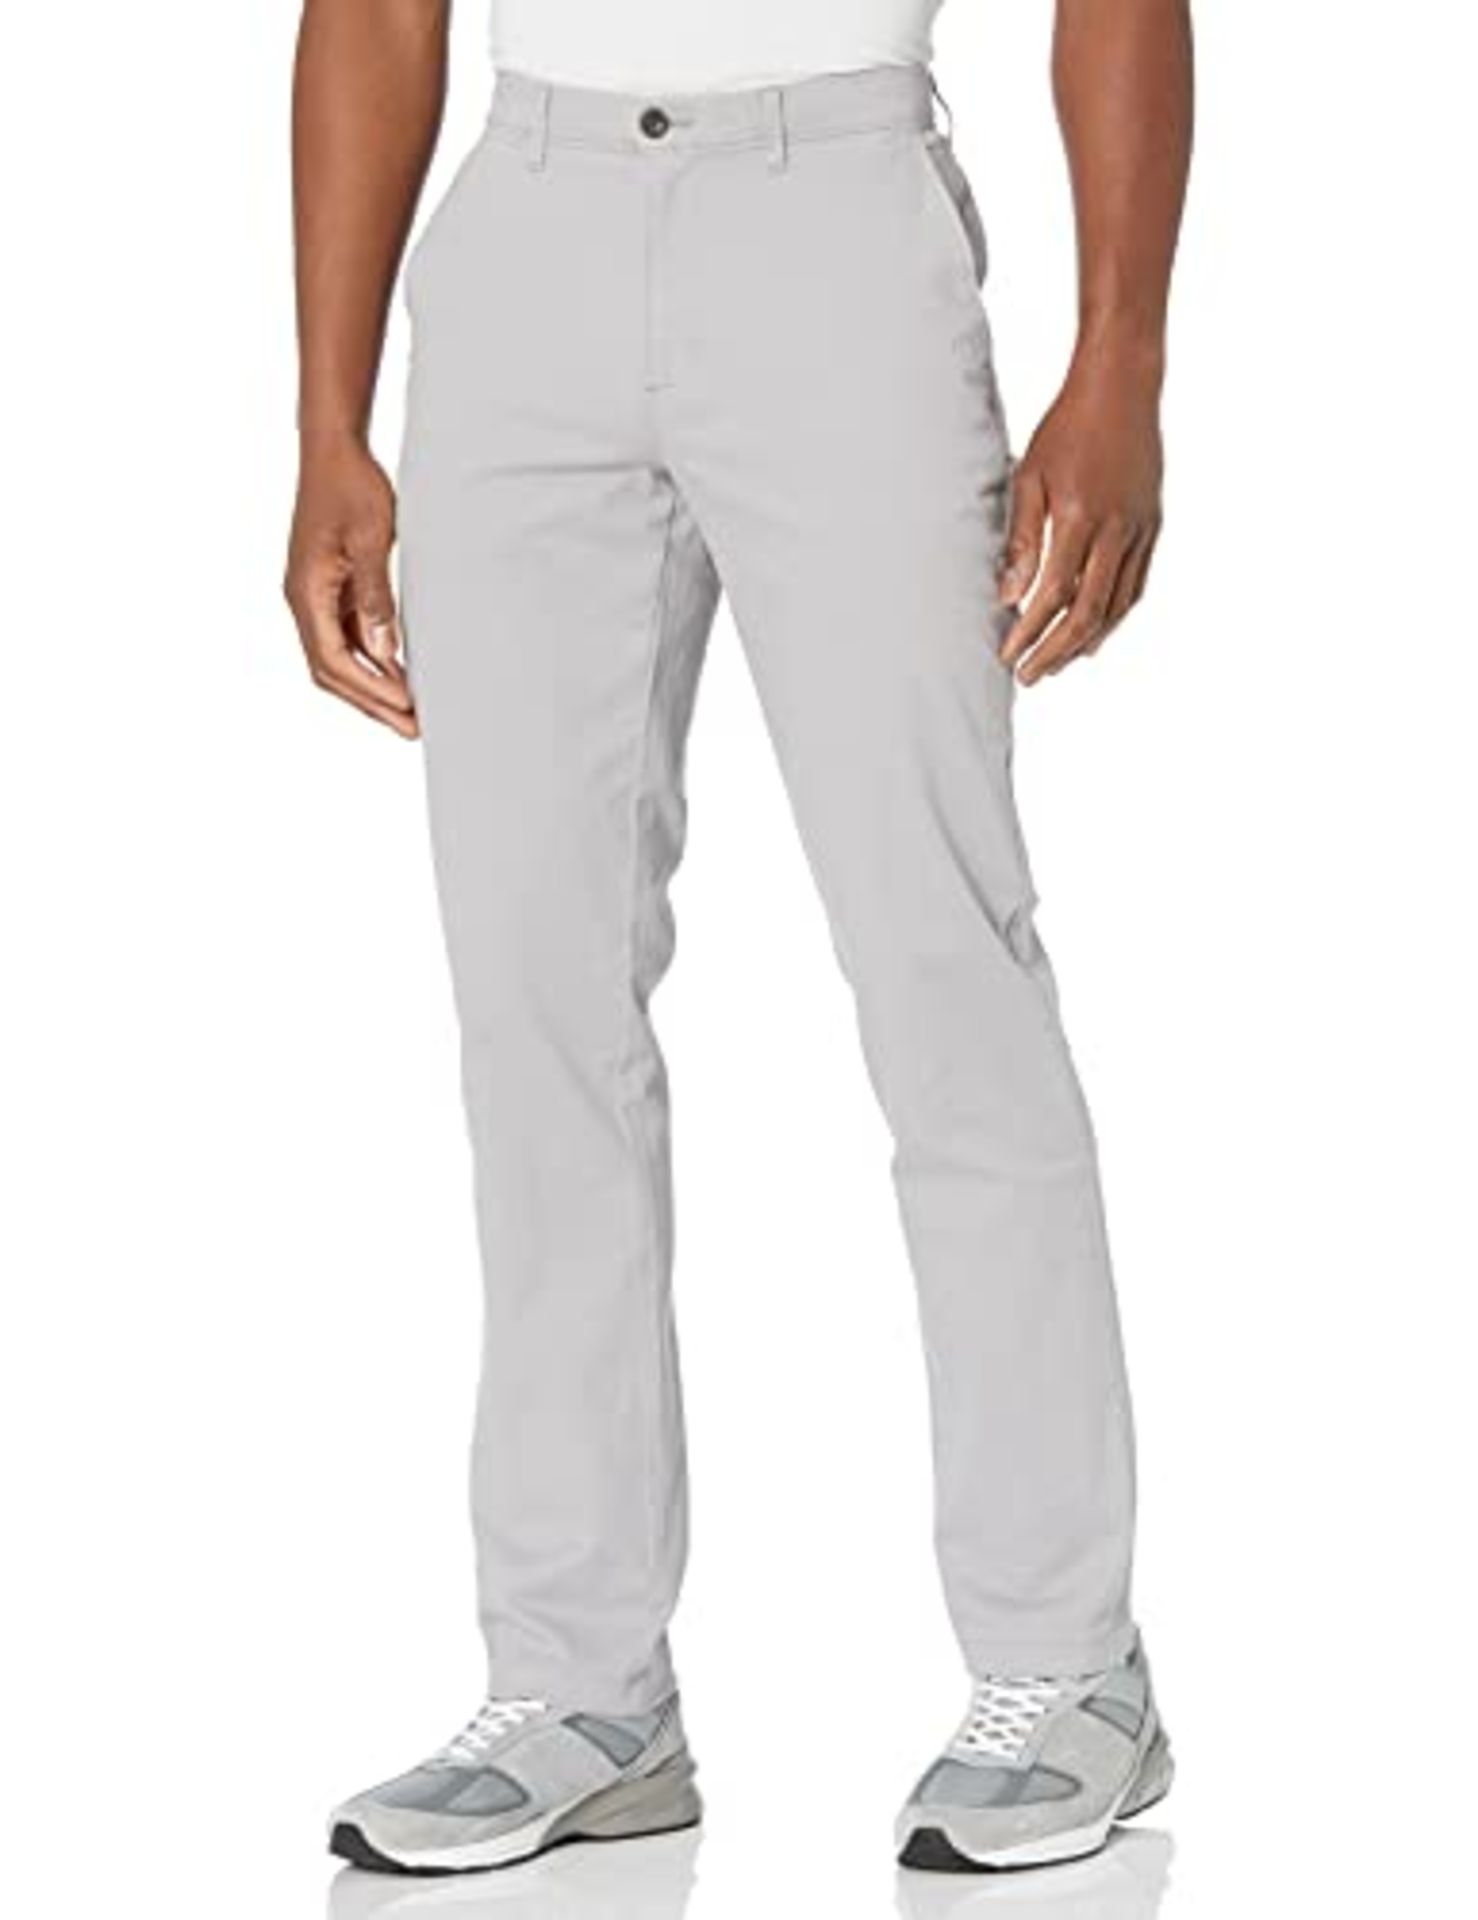 Amazon Essentials Athletic-Fit Broken-in Chino Pant Light Grey, 31W x 30L